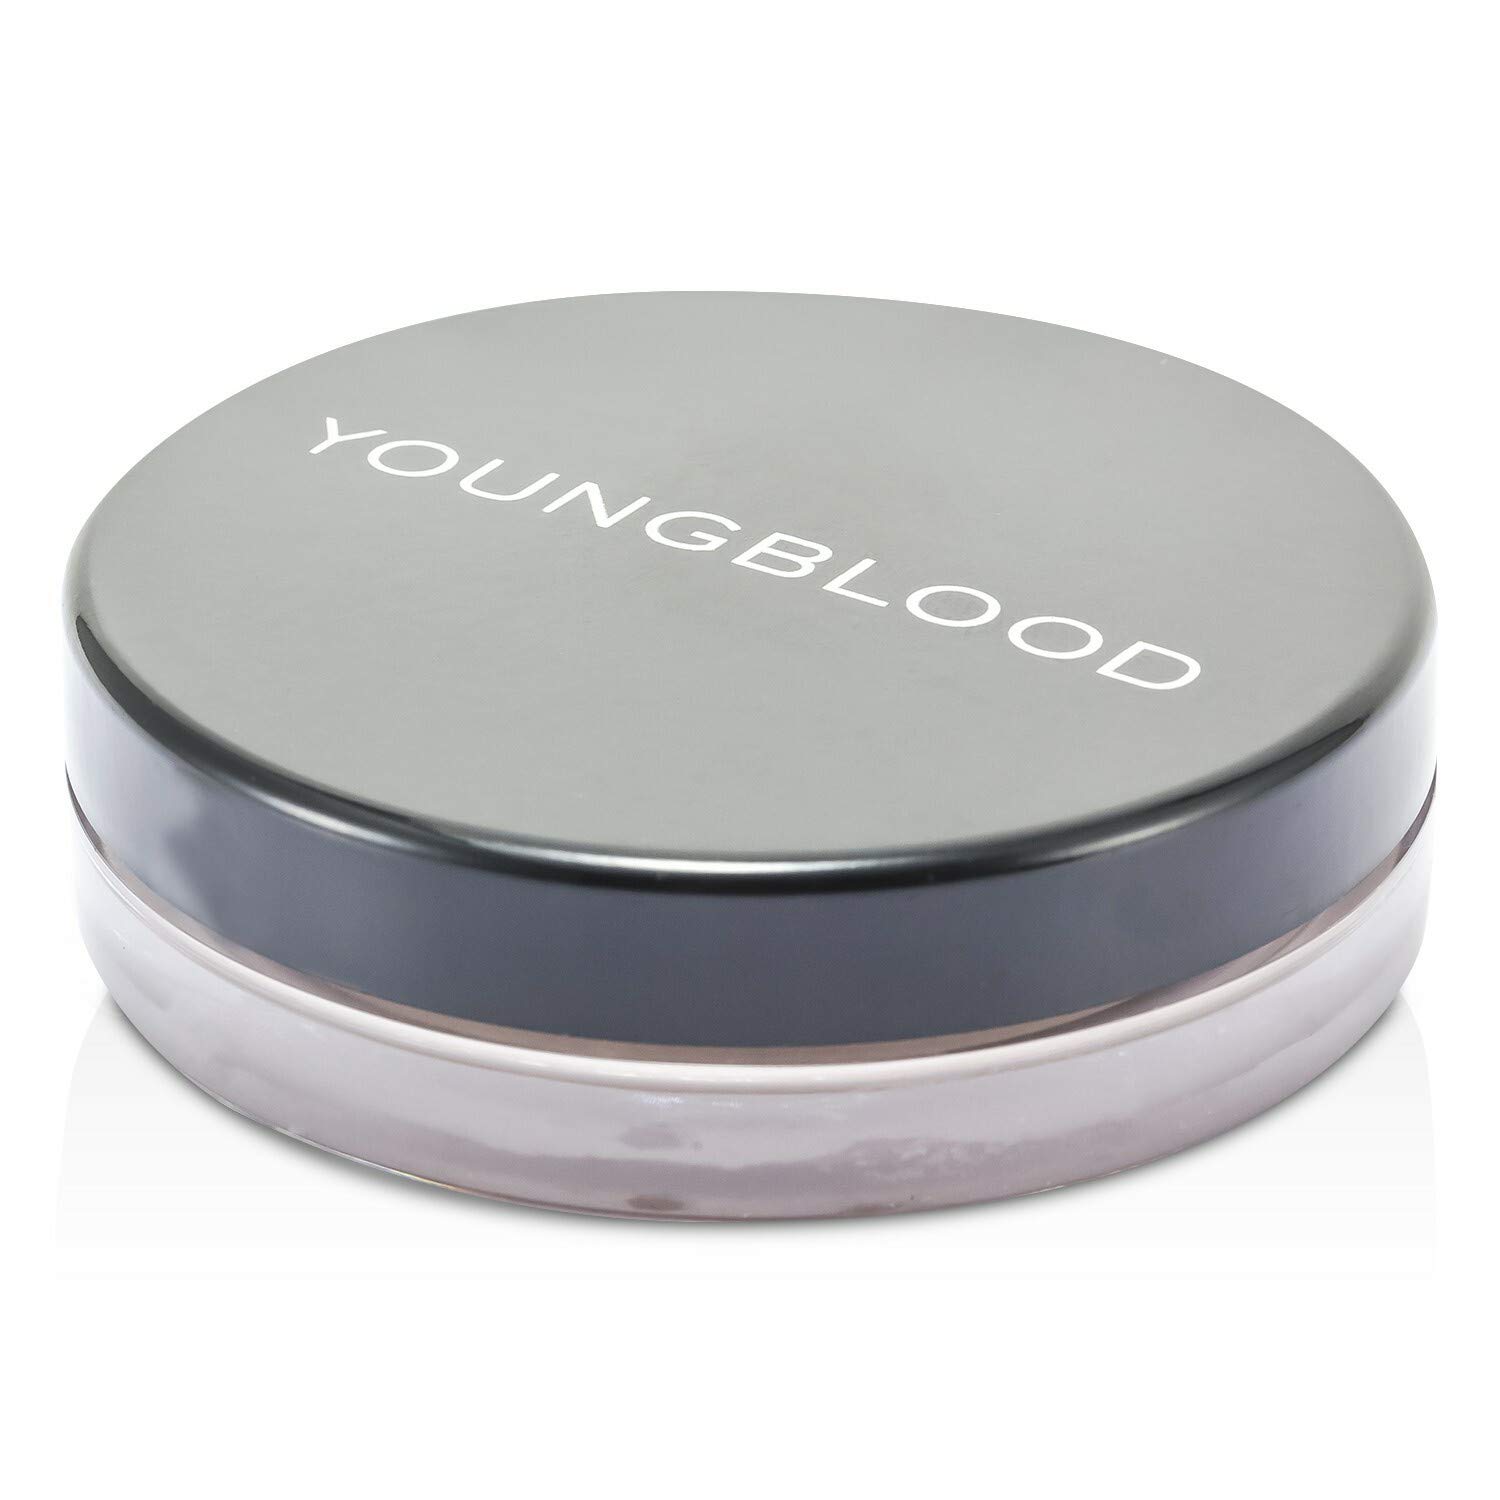 Youngblood Clean Luxury Cosmetics Natural Loose Mineral Foundation, Tawnee | Loose Face Powder Foundation Mineral Illuminating Full Coverage Oil Control Matte Lasting | Vegan, Cruelty-Free